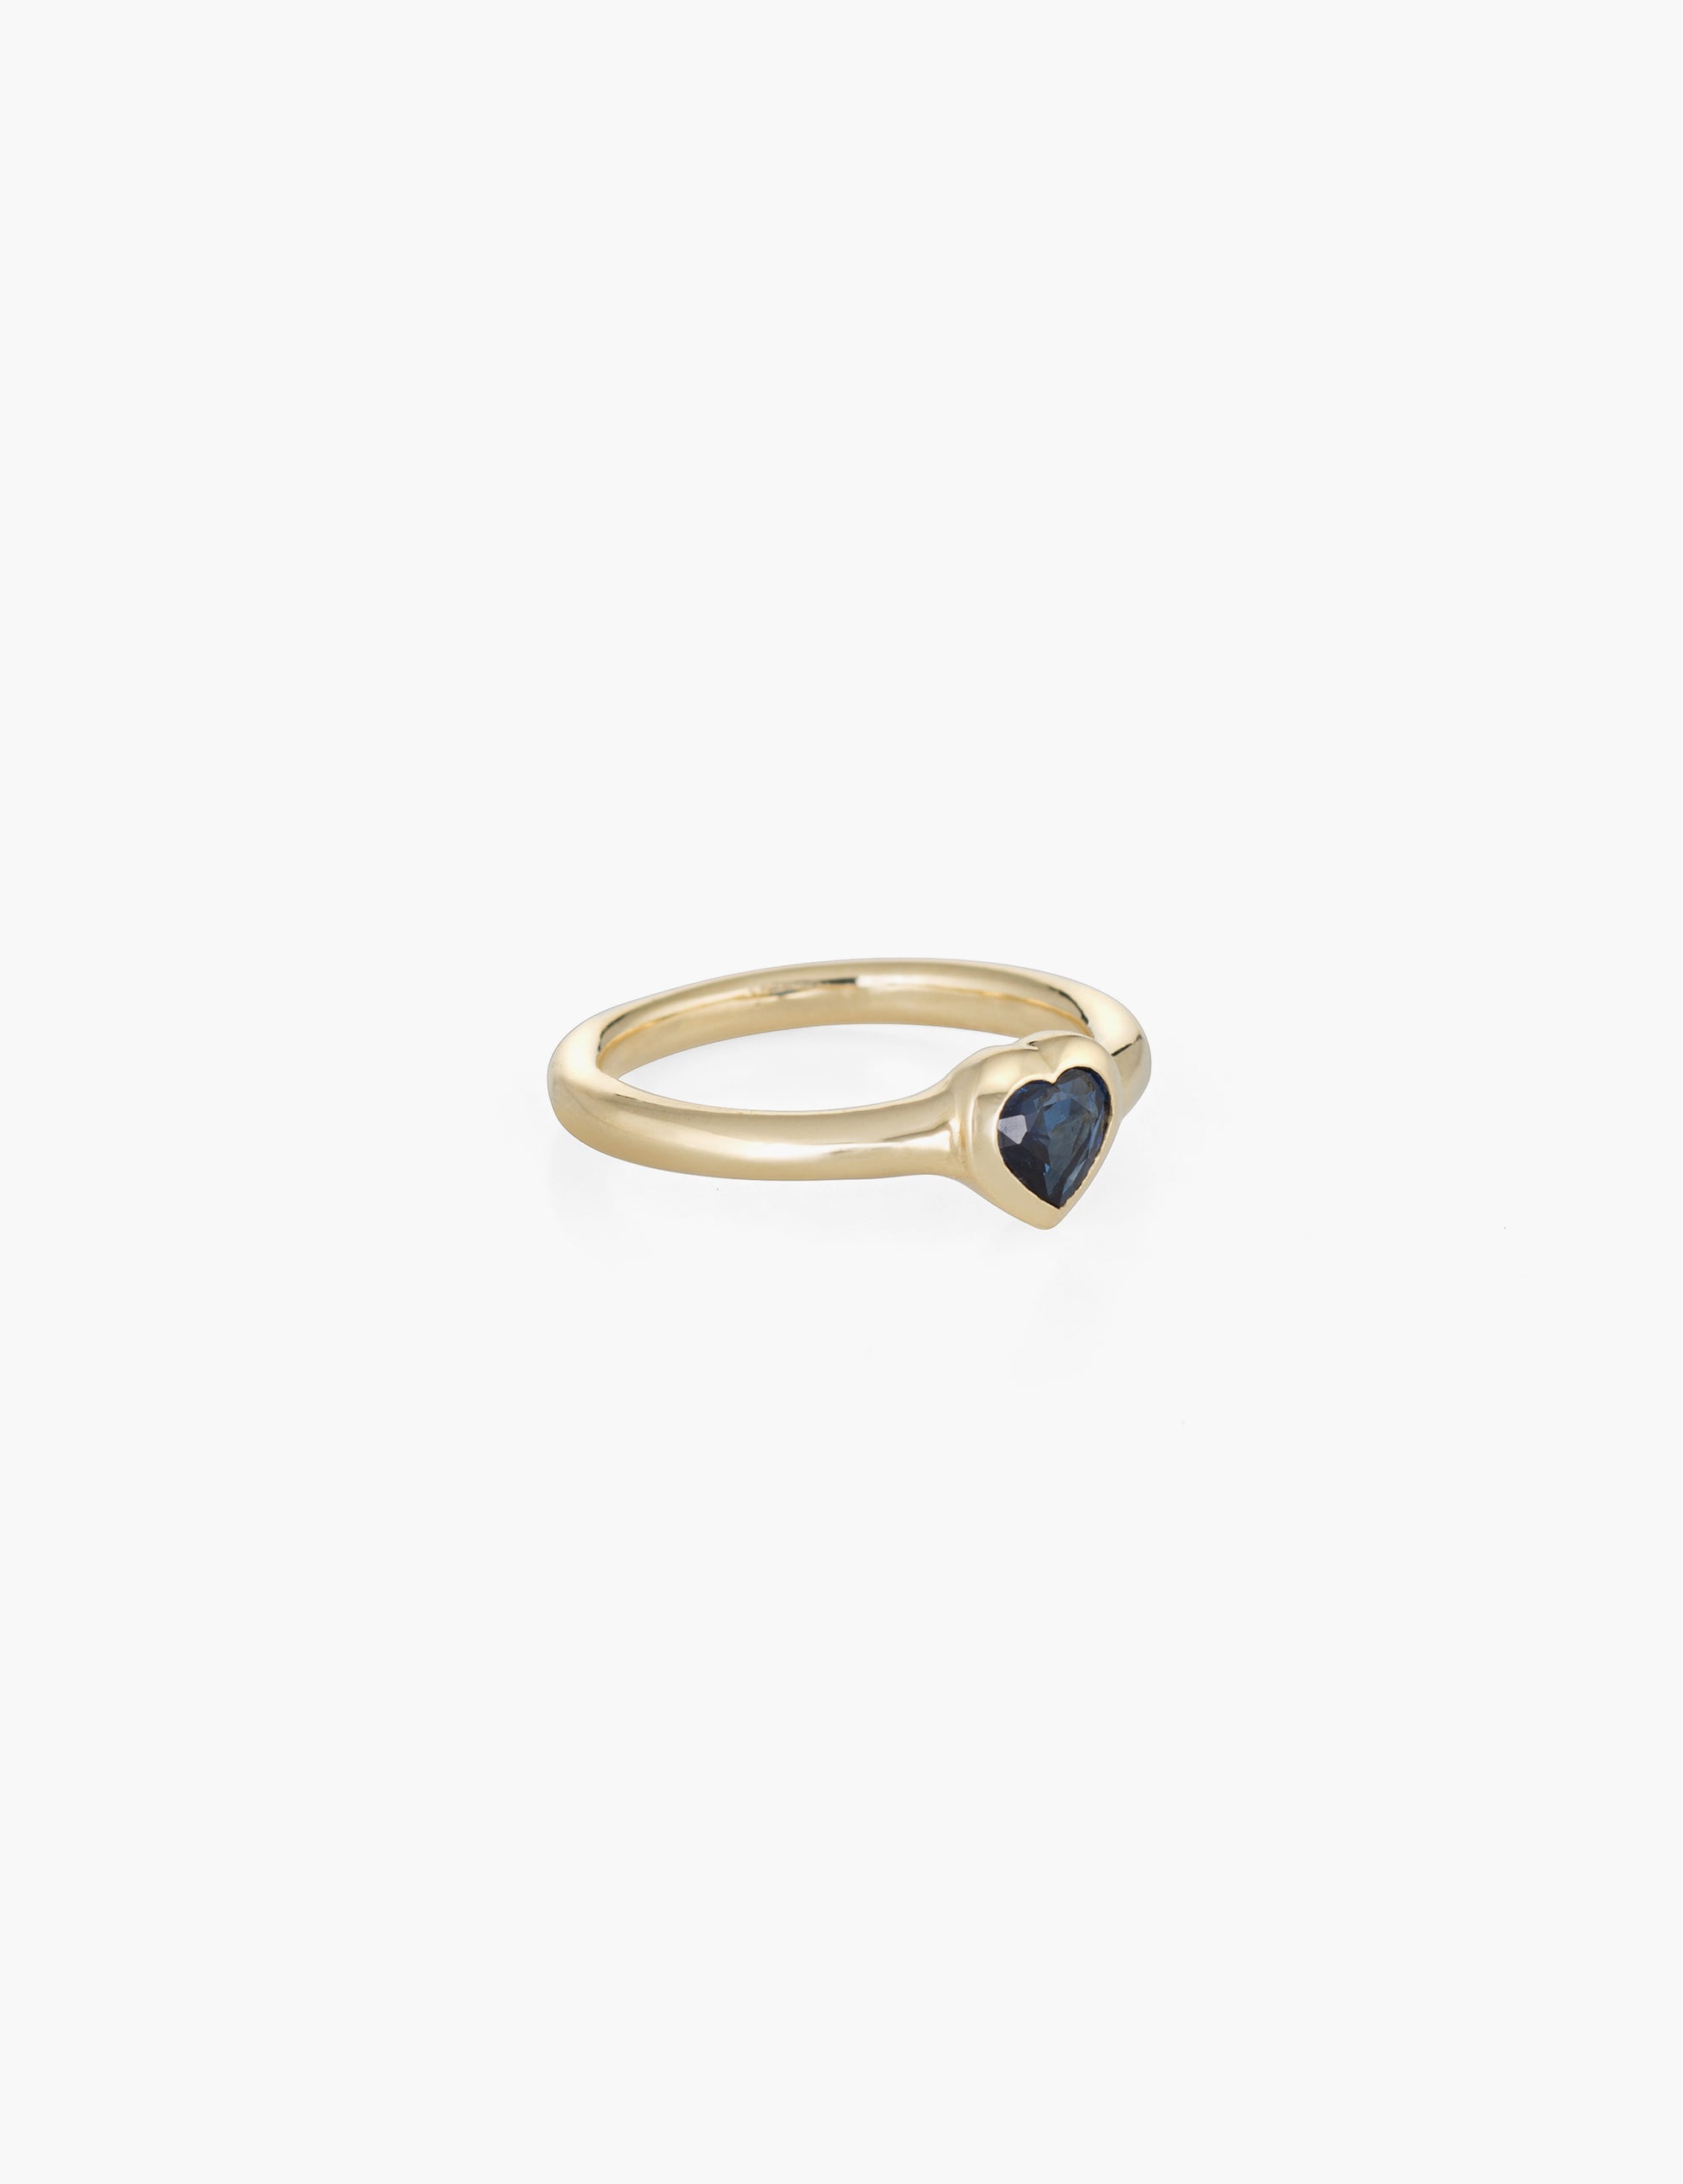 Small blue sapphire heart ring